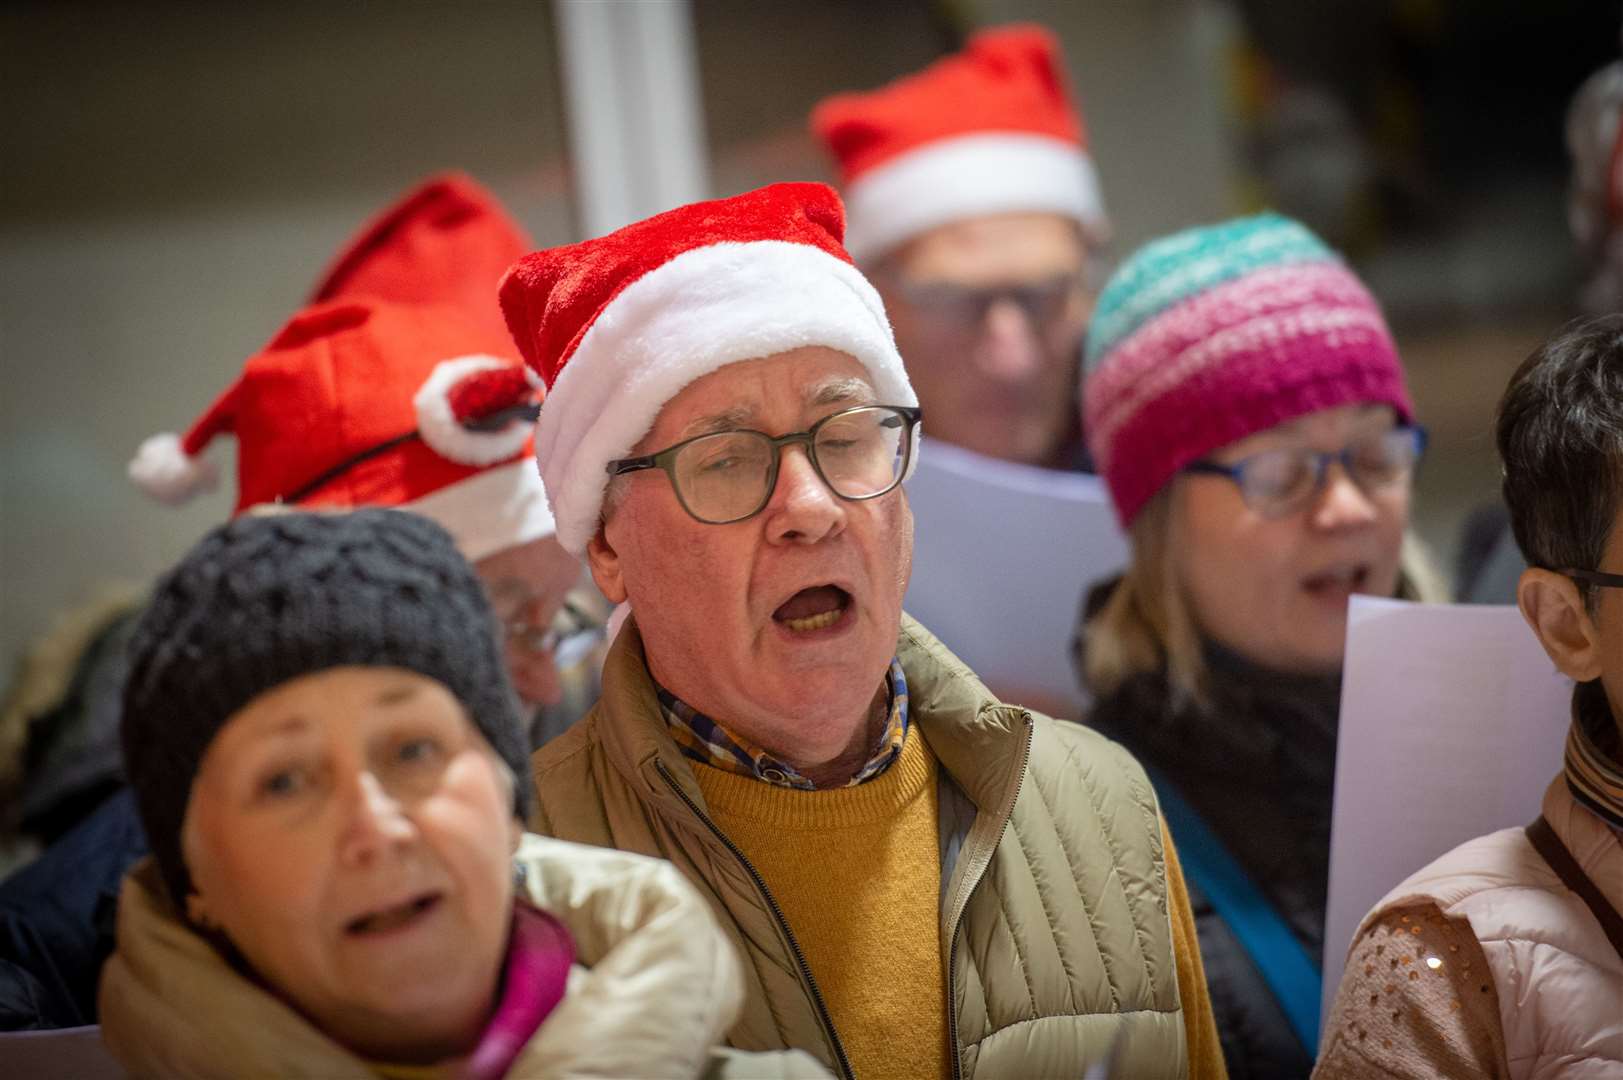 Singing at the Christmas market. Picture: Callum Mackay